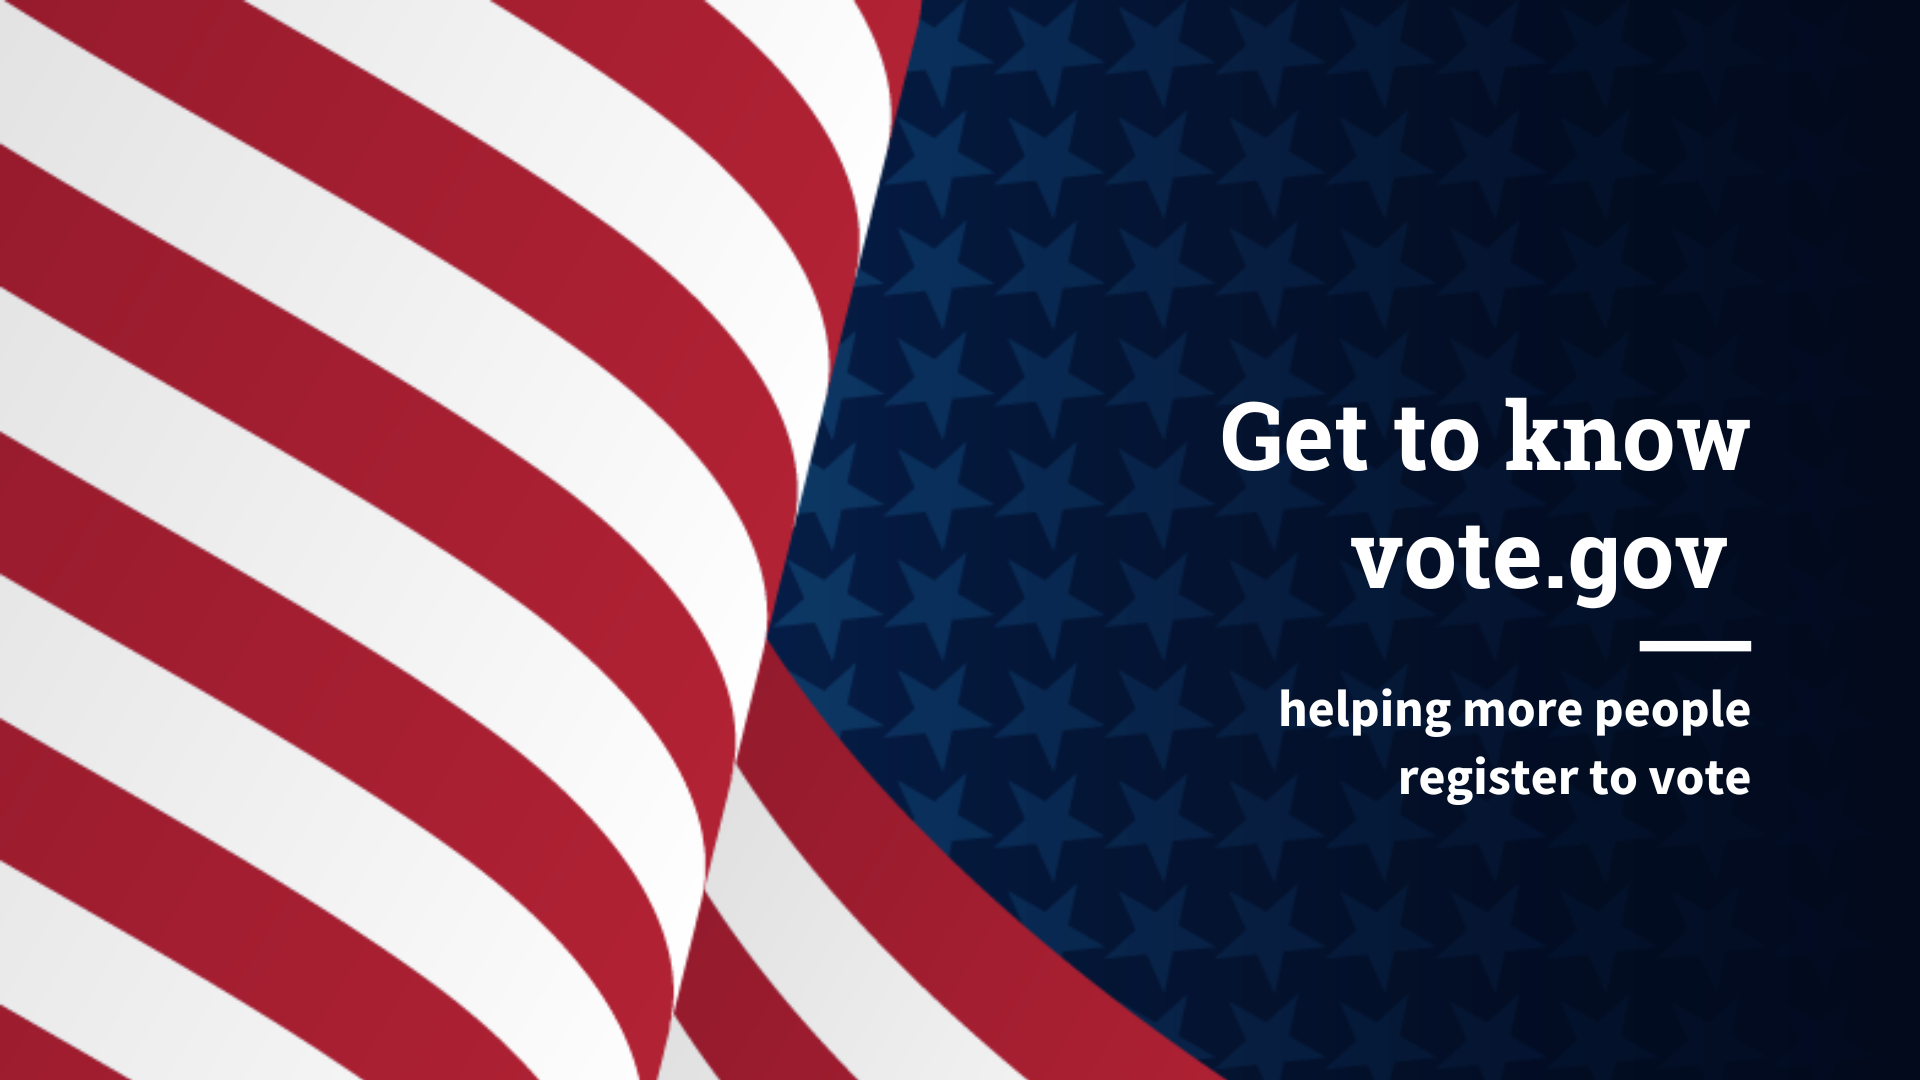 Get to know vote.gov: helping more people register to vote